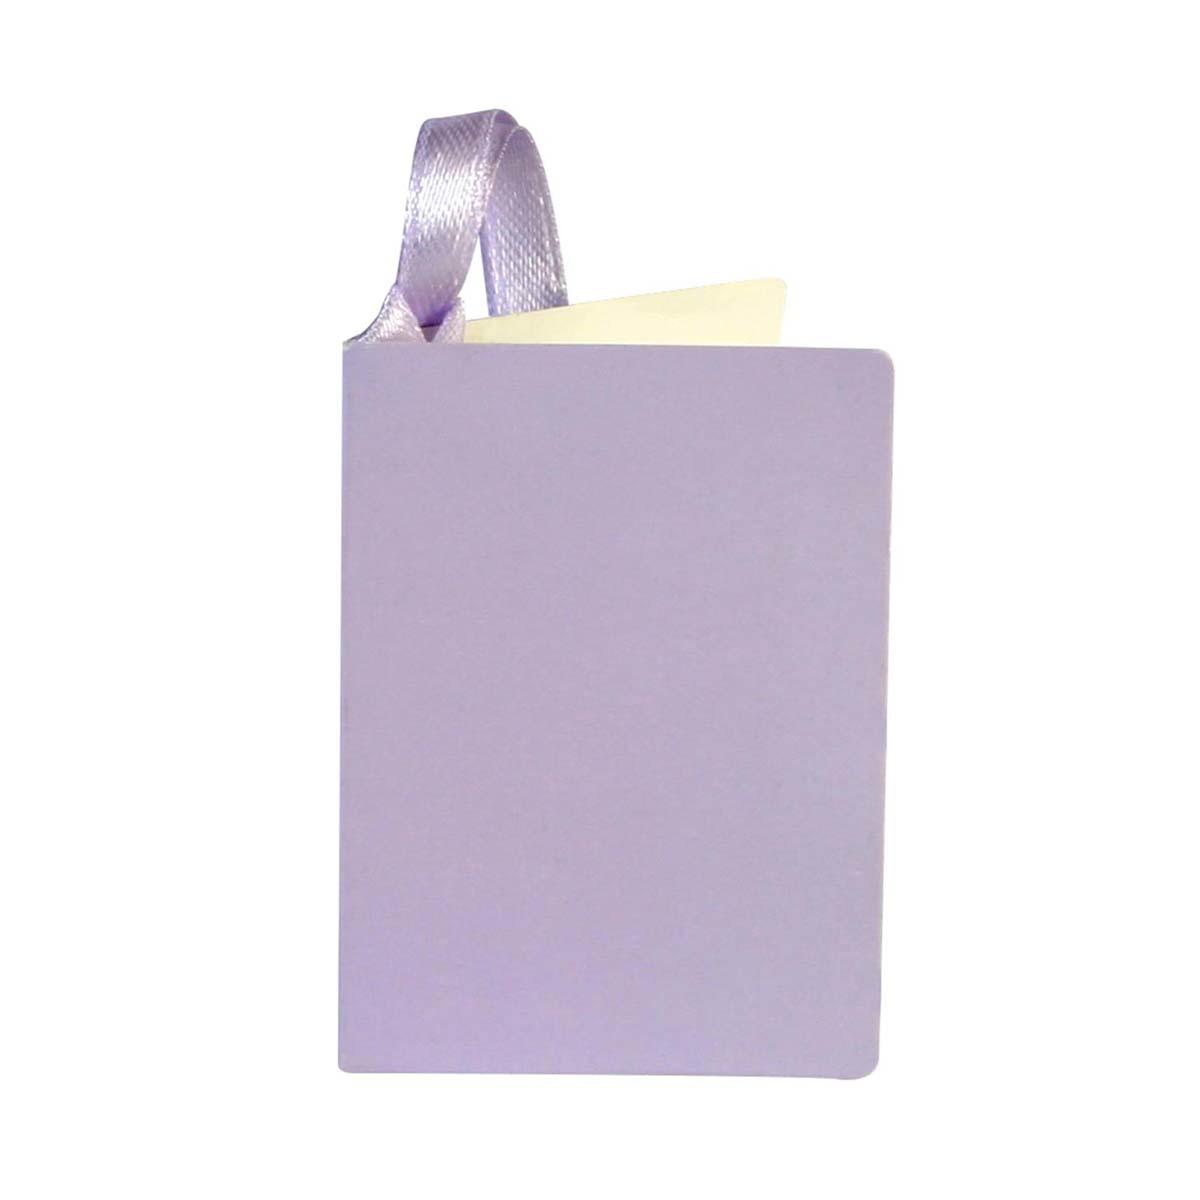 Single Lilac Gift Tag Displayed In Full